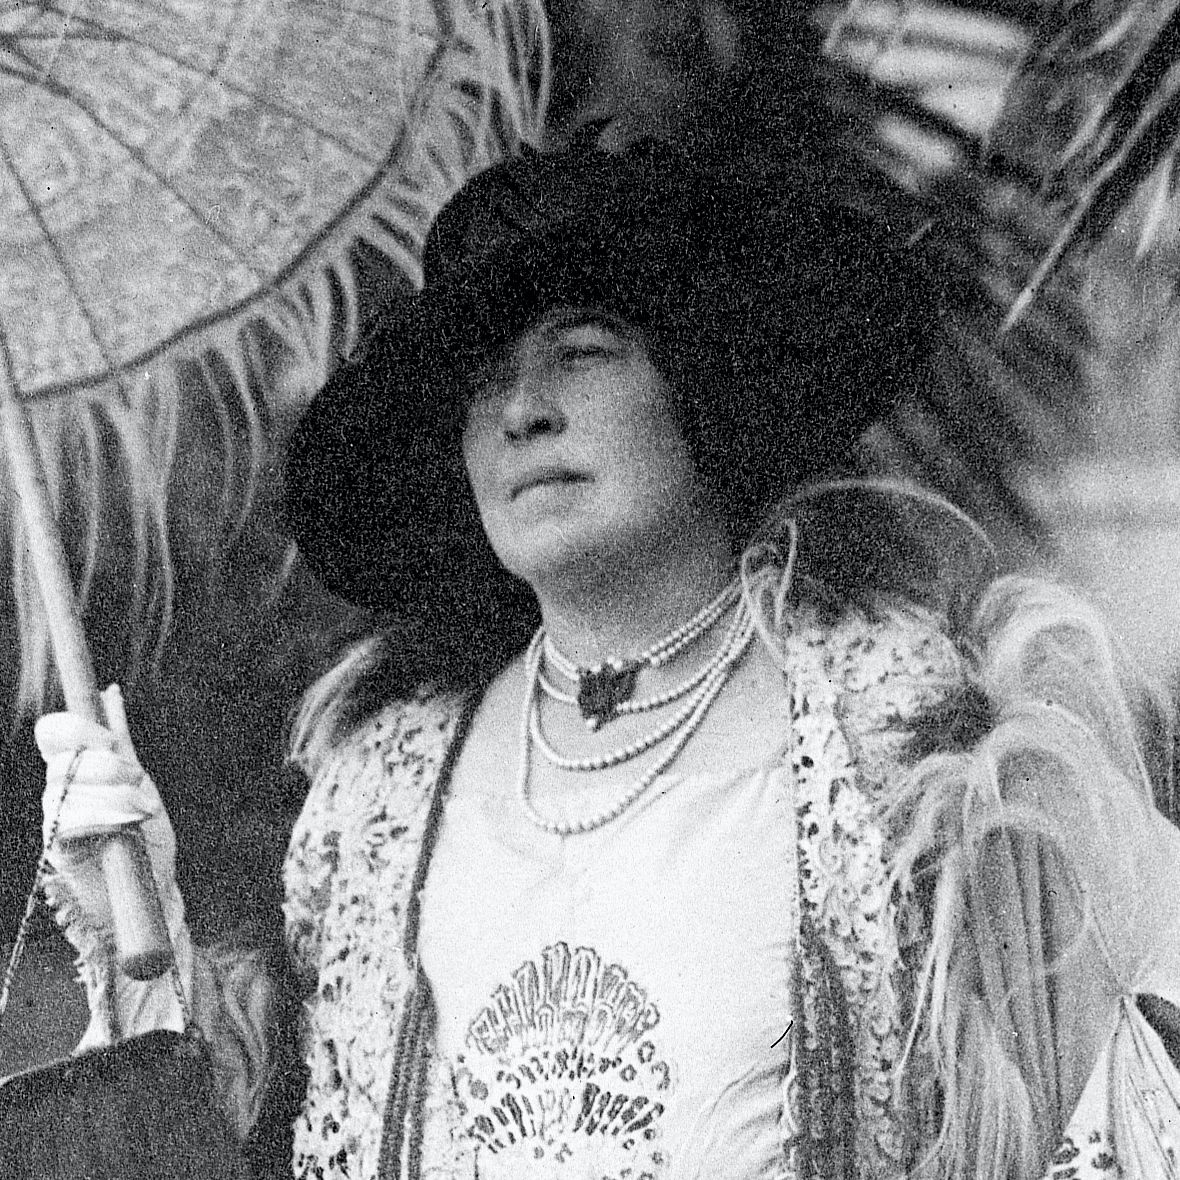 How 'The Unsinkable Molly Brown' Became A Titanic Hero